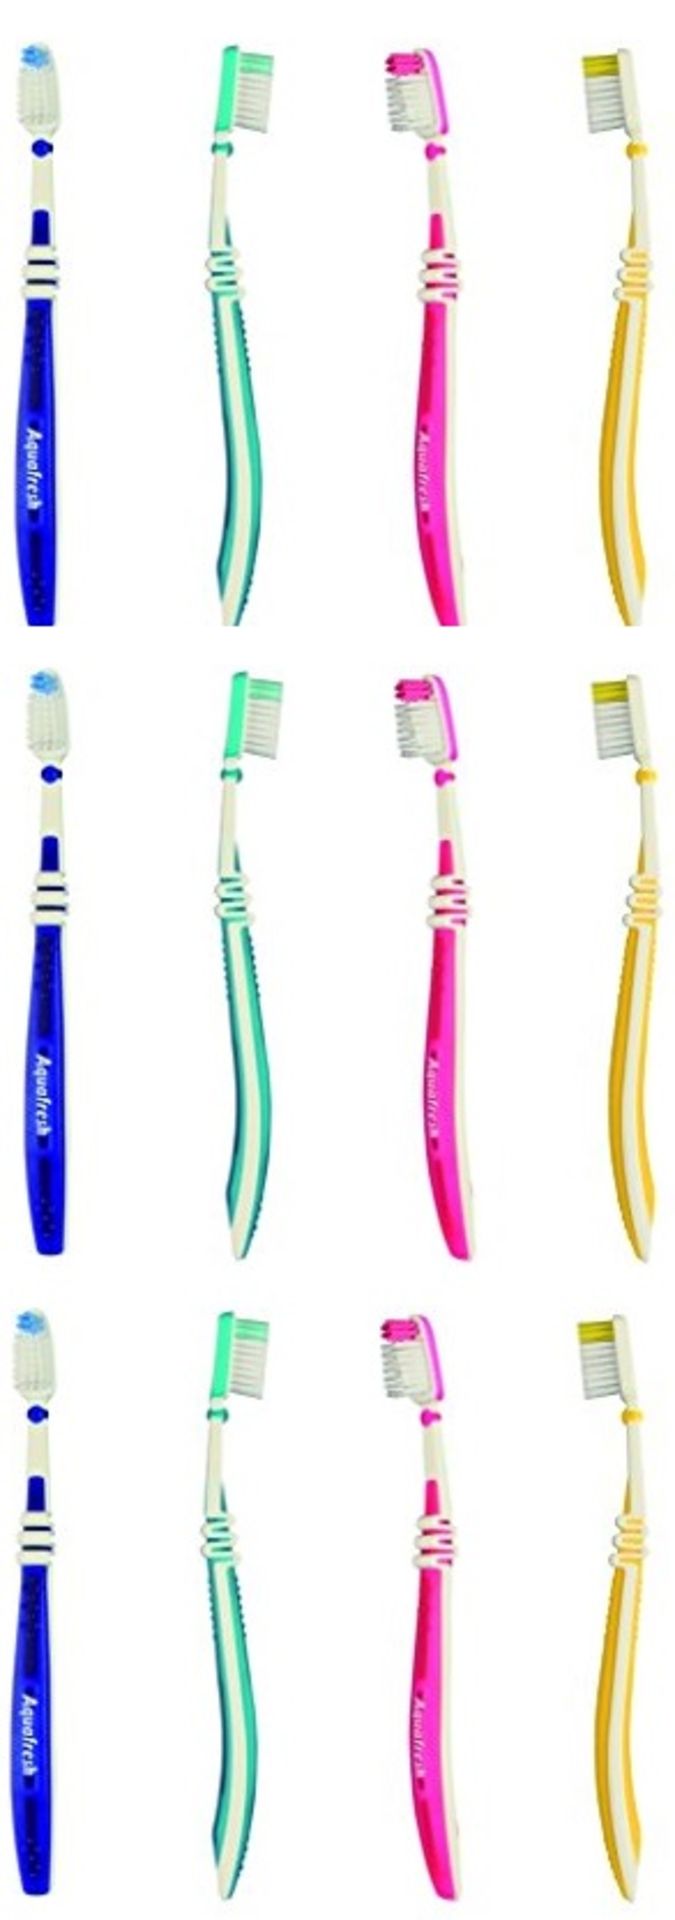 V Brand New 12 x Aquafresh Activate Triple Protection Toothbrush Firm Clean Amazon Price £11.96 (